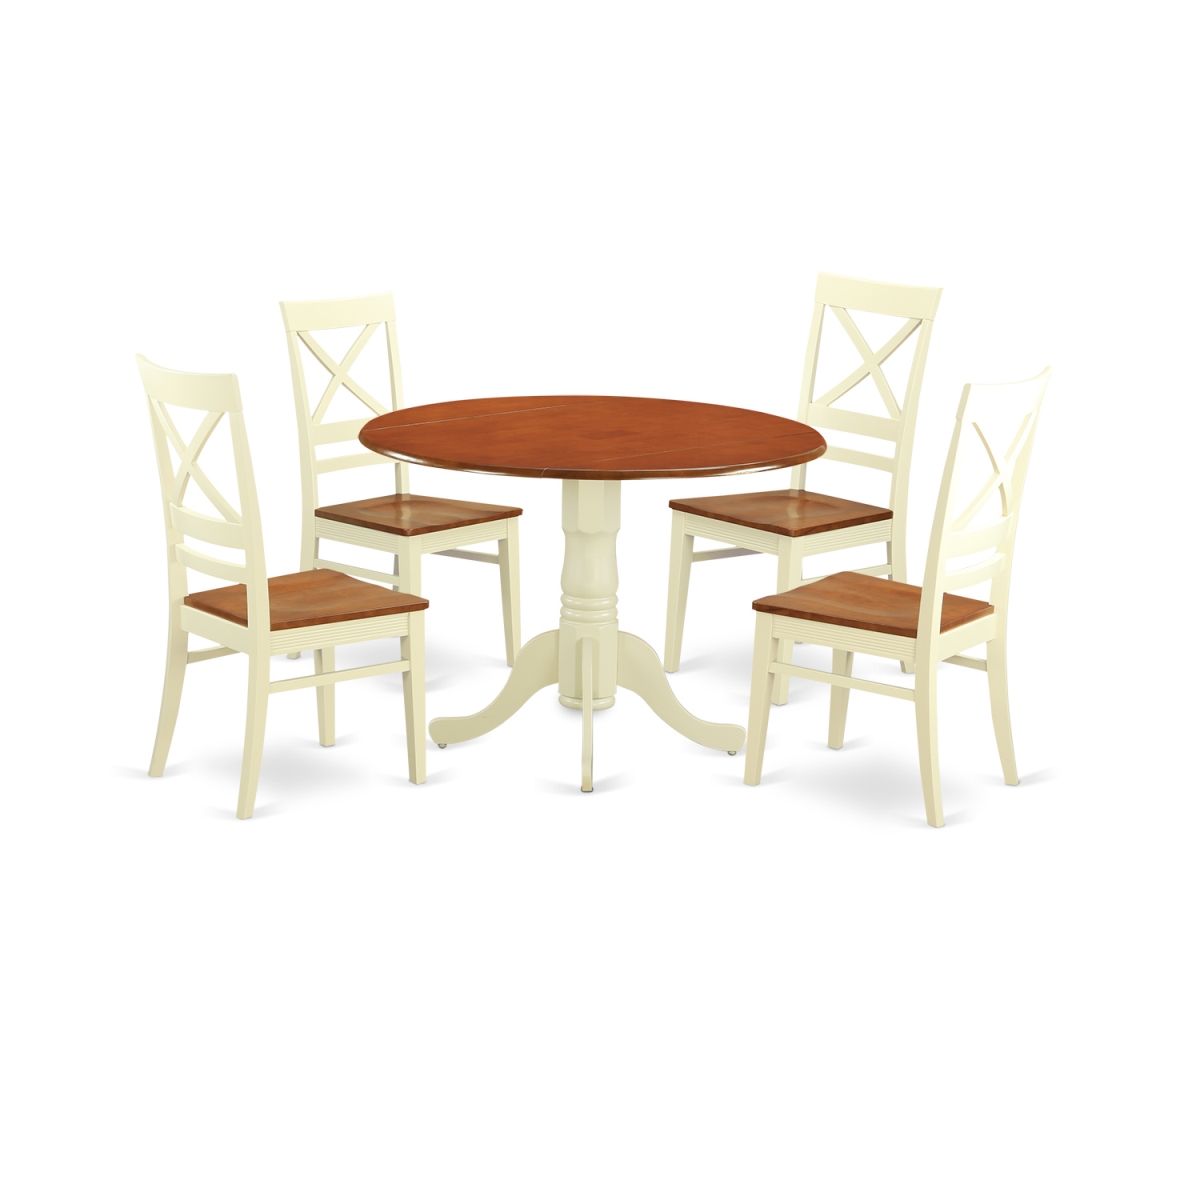 Picture of East West Furniture DLQU5-BMK-W Small Kitchen Table Set - Kitchen Table & 4 Chairs, Buttermilk & Cherry - 5 Piece